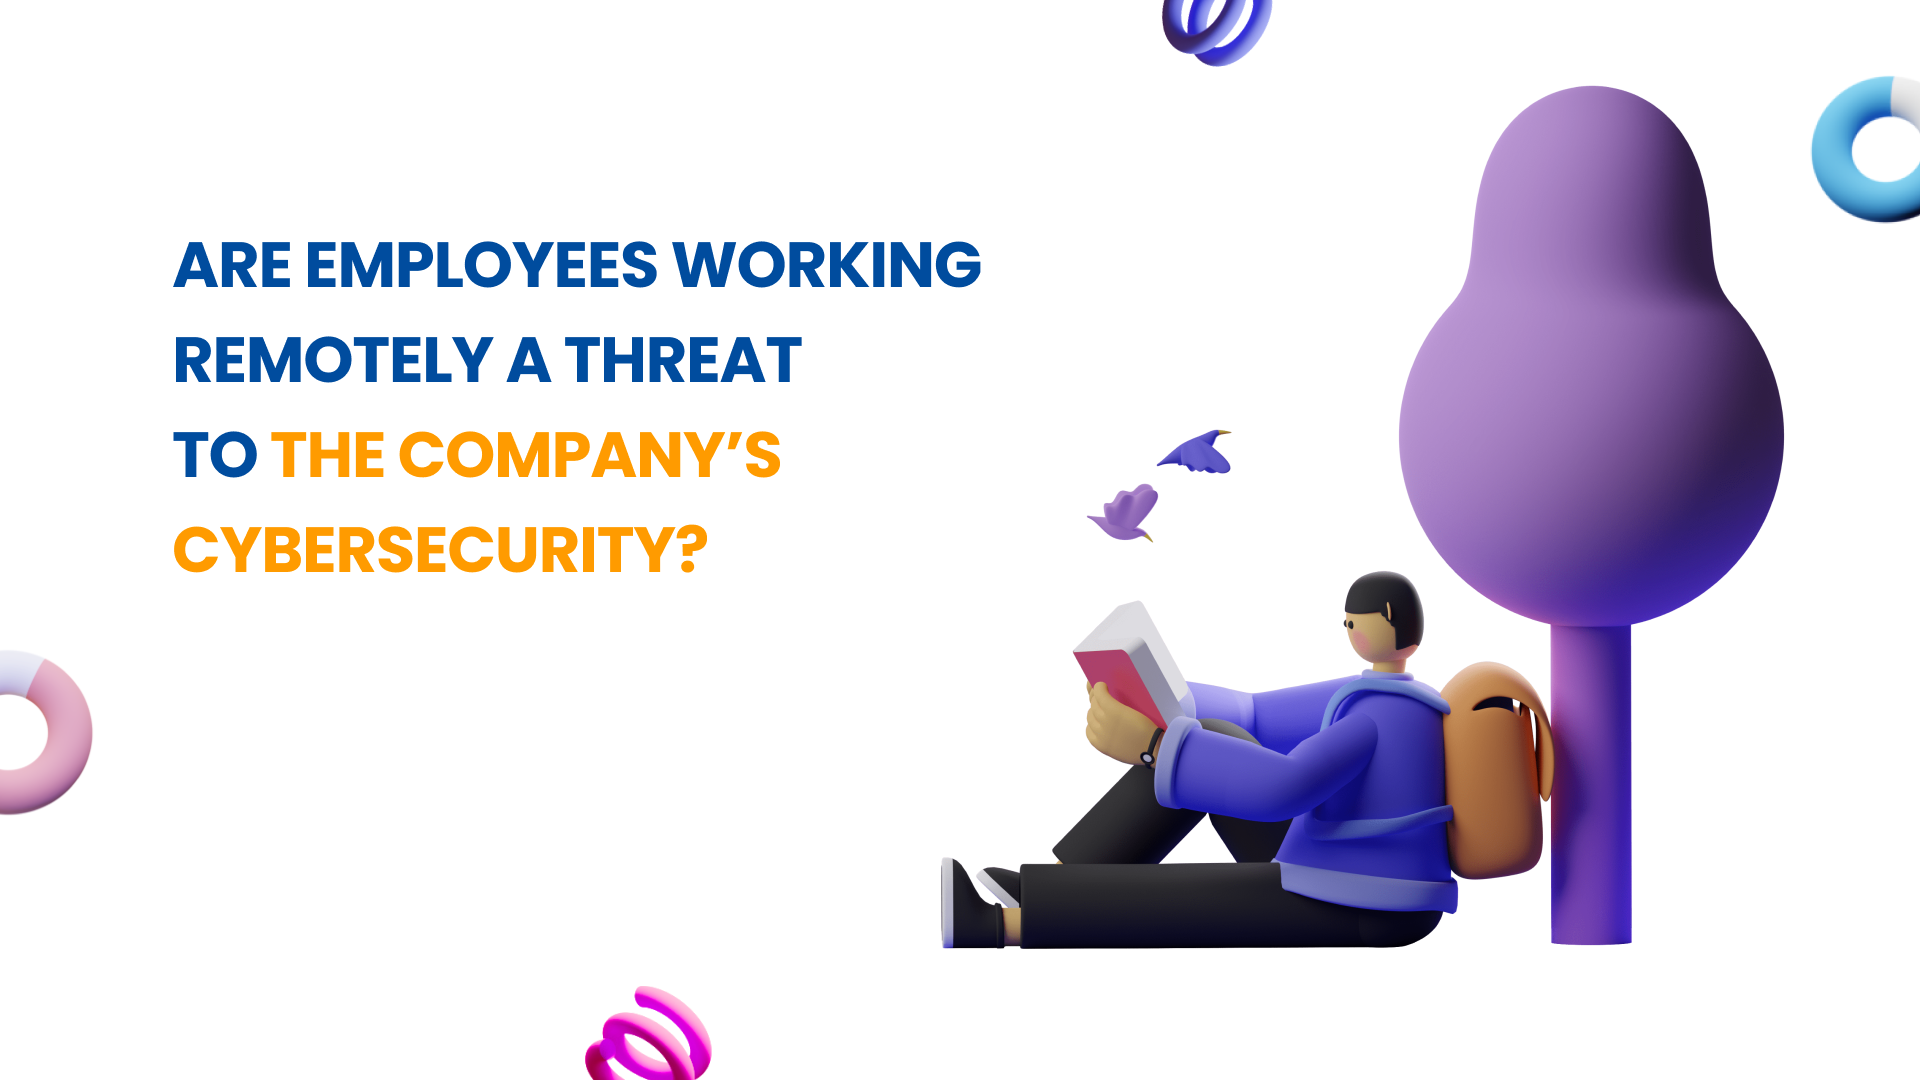 Are employees working remotely a threat to the company’s cybersecurity?